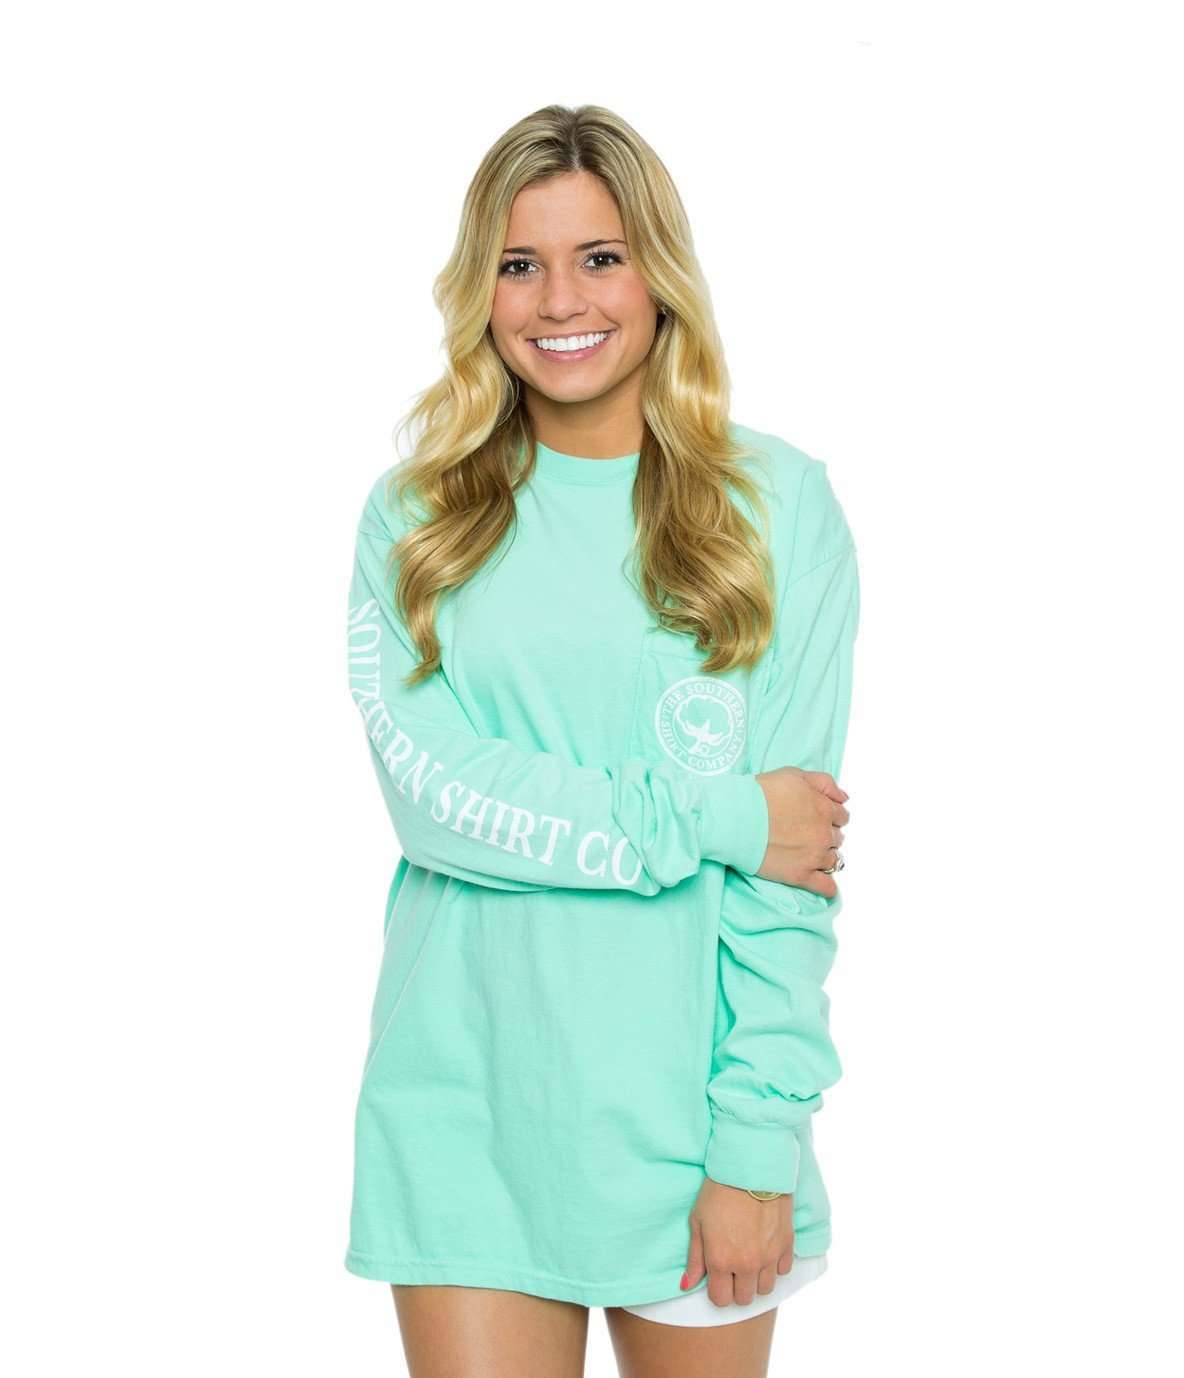 Long Sleeve Seaside Logo Tee in Island Reef Green by The Southern Shirt Co. - Country Club Prep